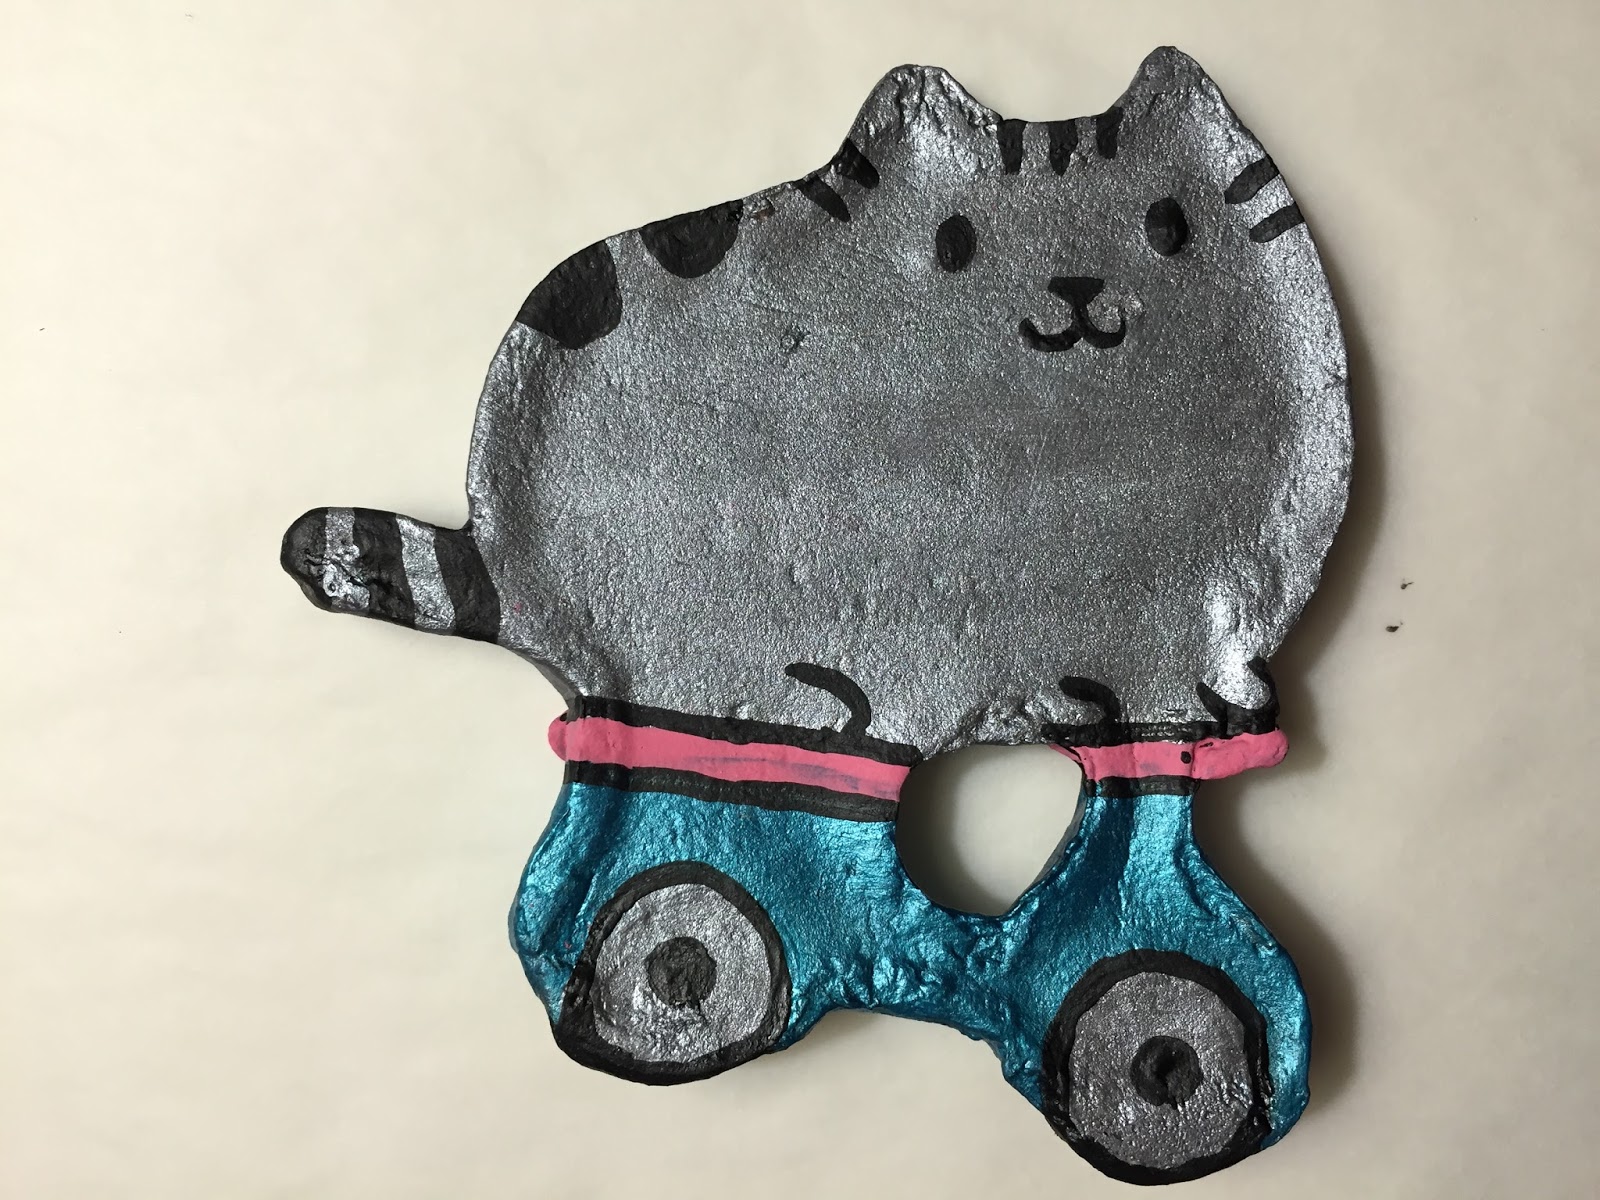 Creative Paperclay® air dry modeling material: Creative Paperclay Figure  Pusheen The Cat Tutorial